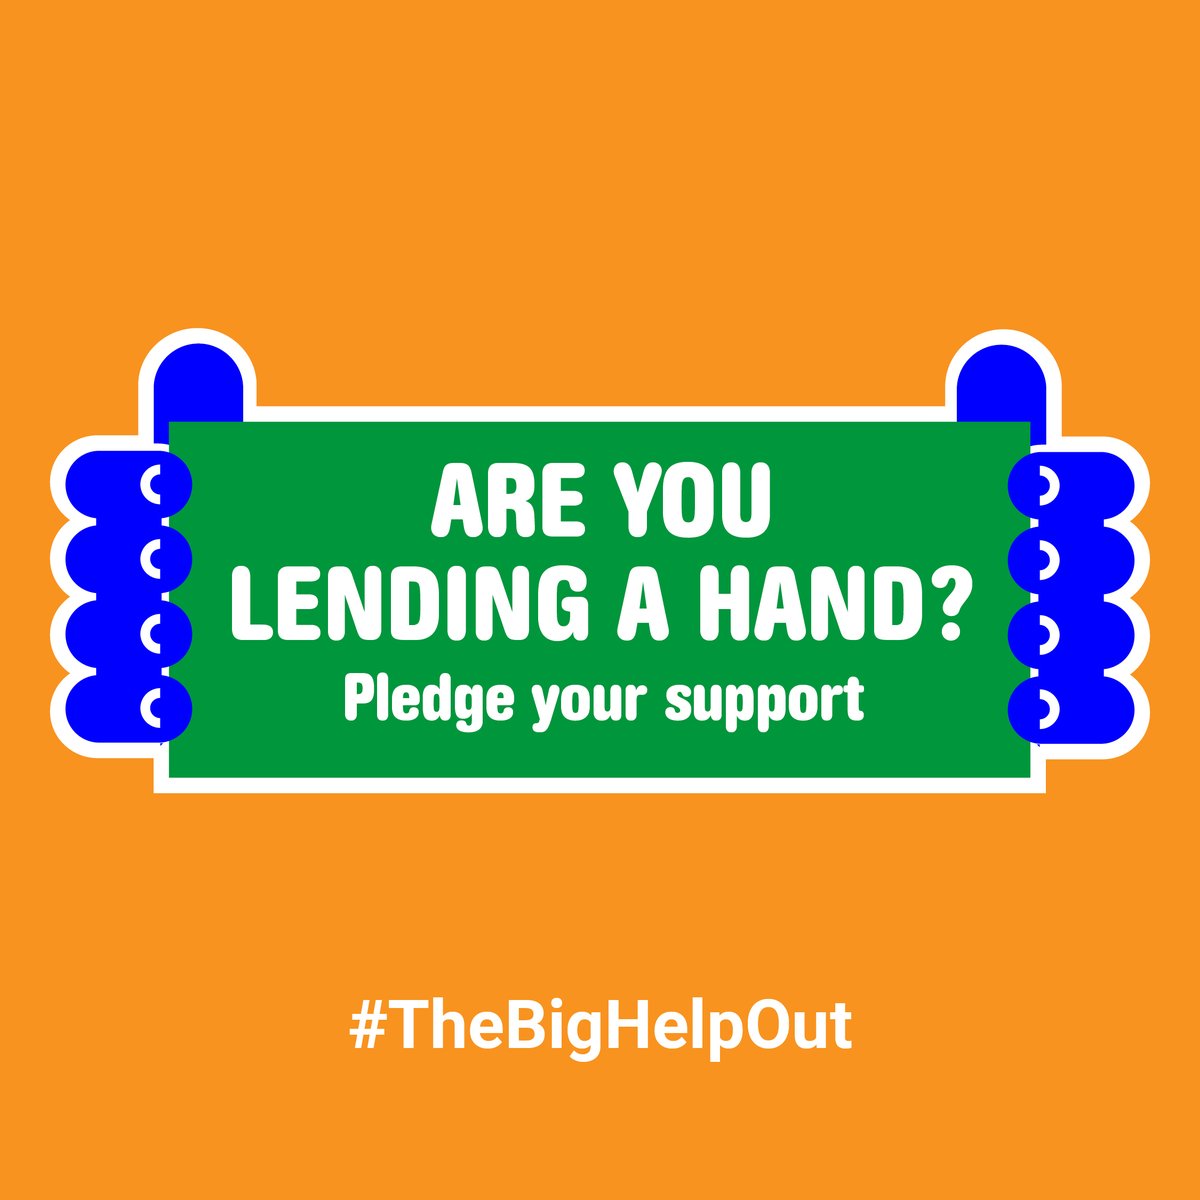 We're going to be part of the biggest mass volunteering event between 7th-9th June, look out for more details closer to the time! #TheBigHelpOut😀